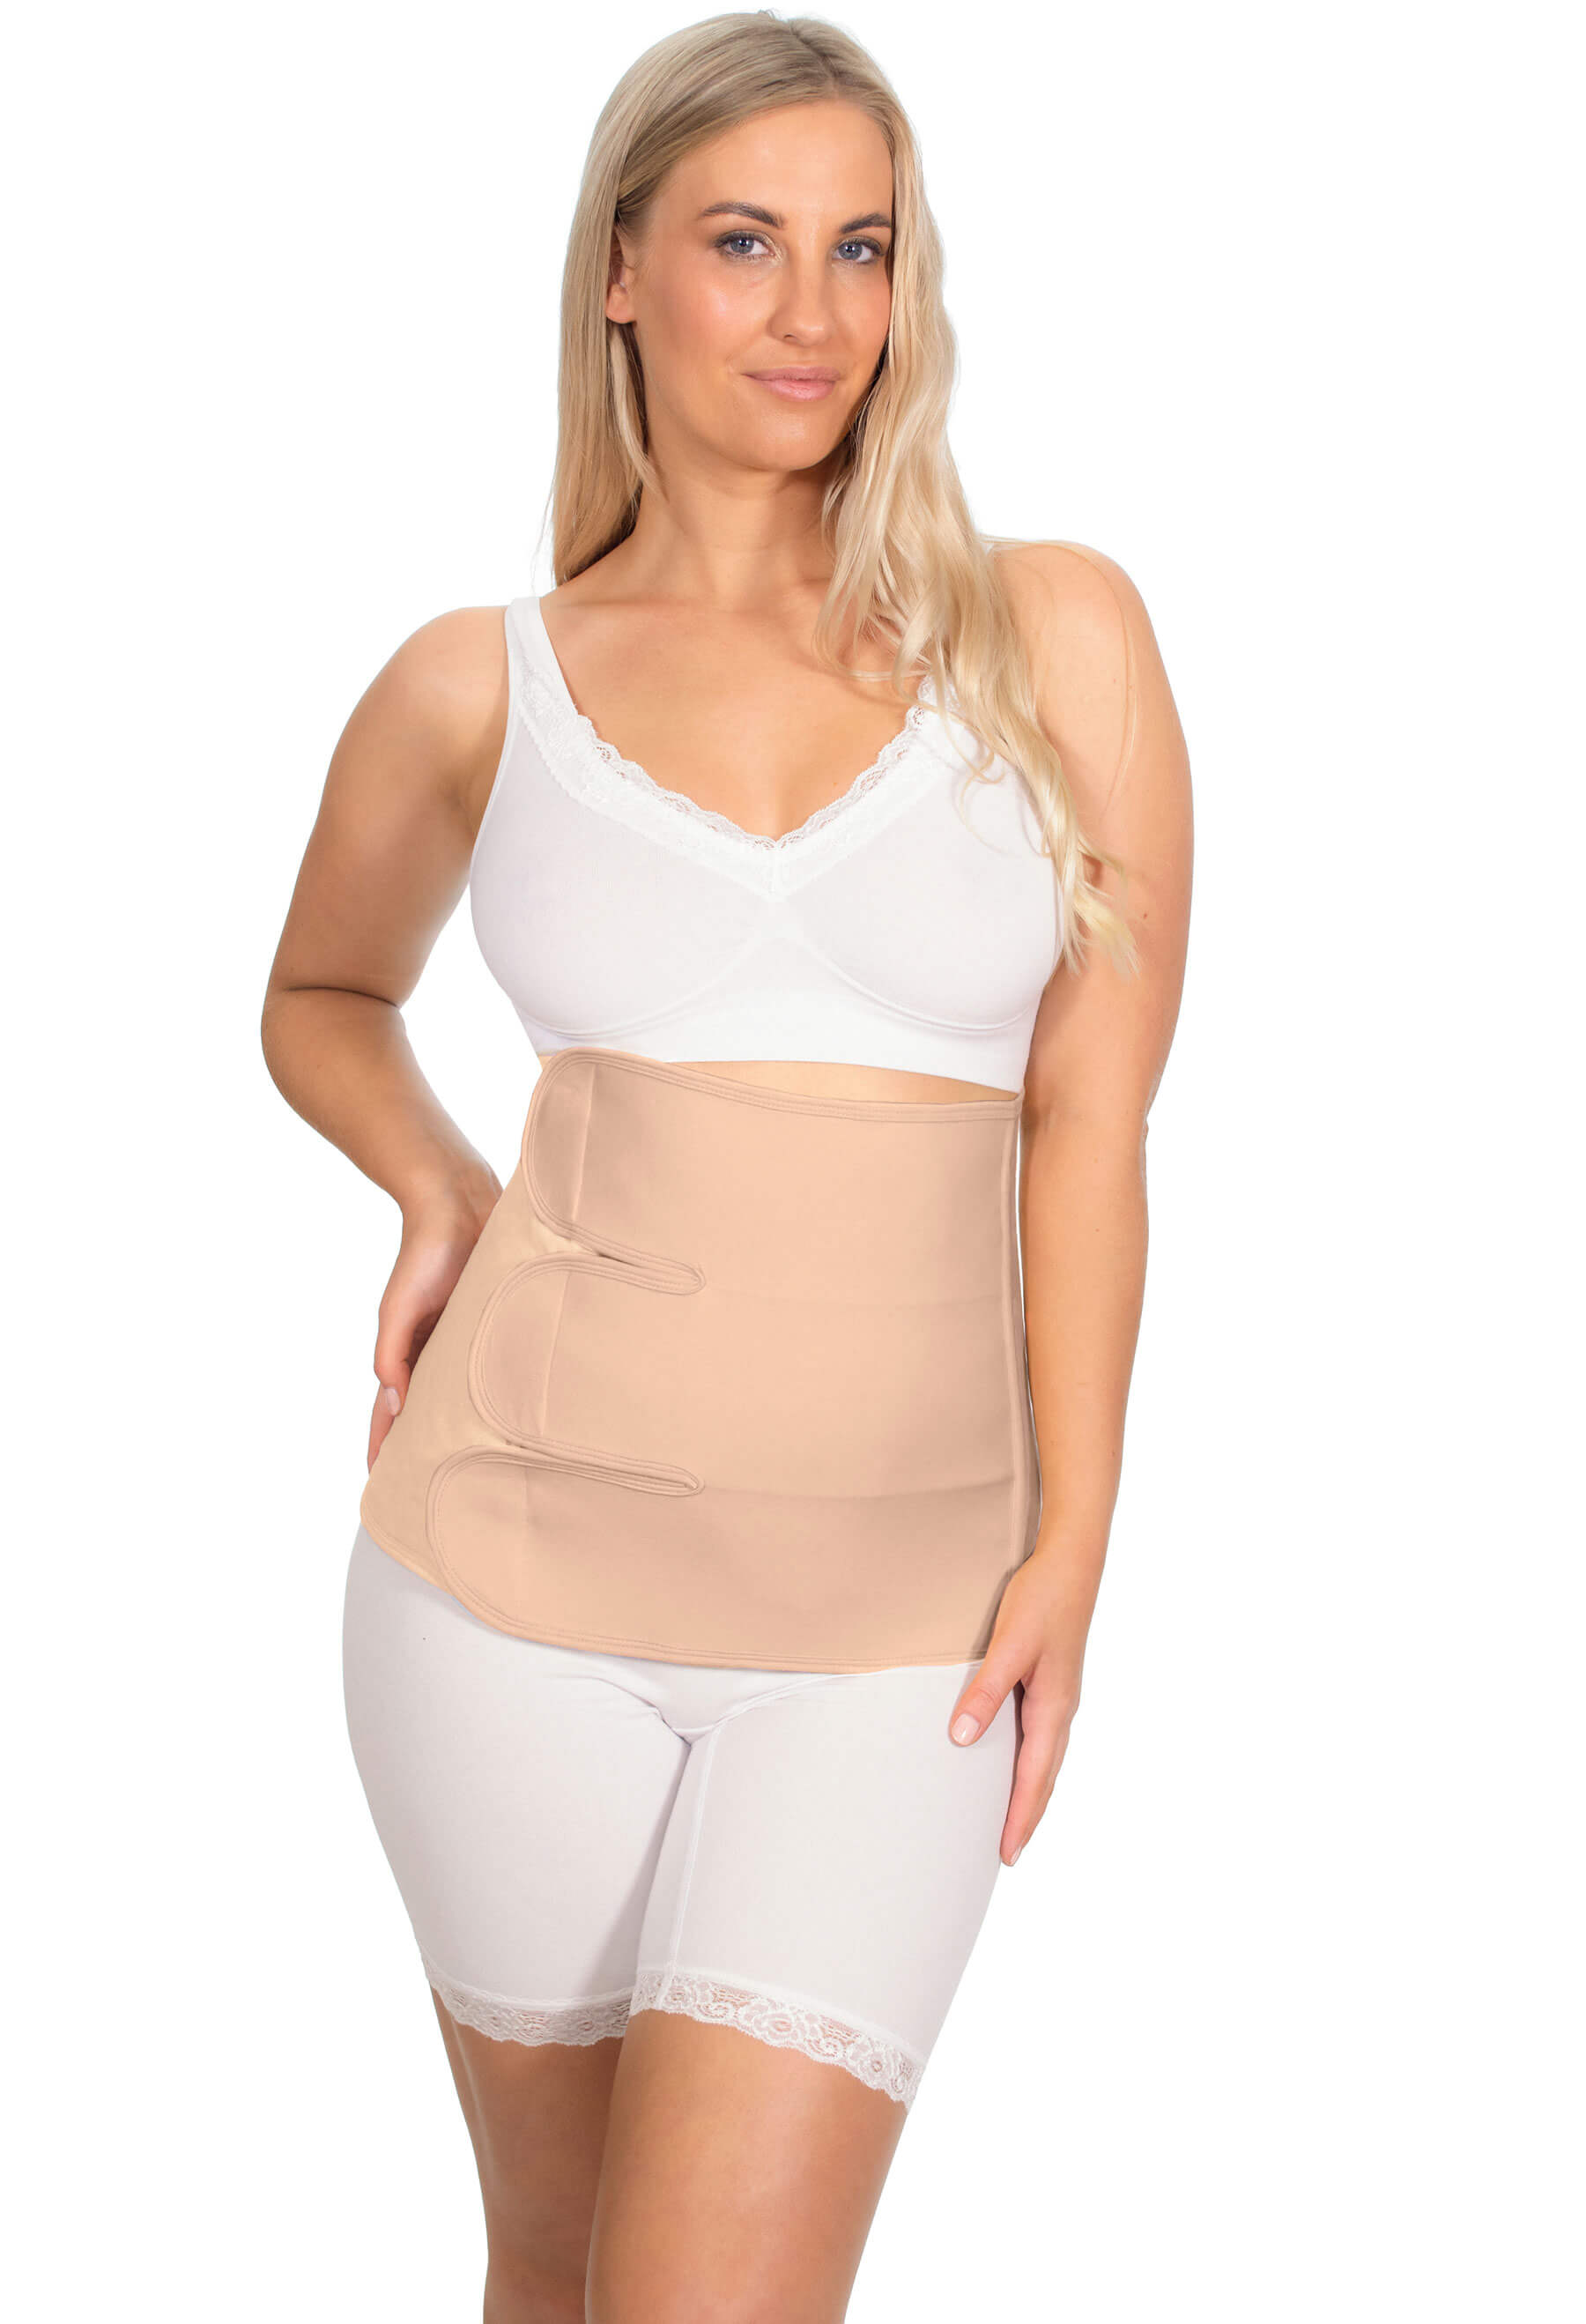 When Can I Wear Shapewear After A C-Section?